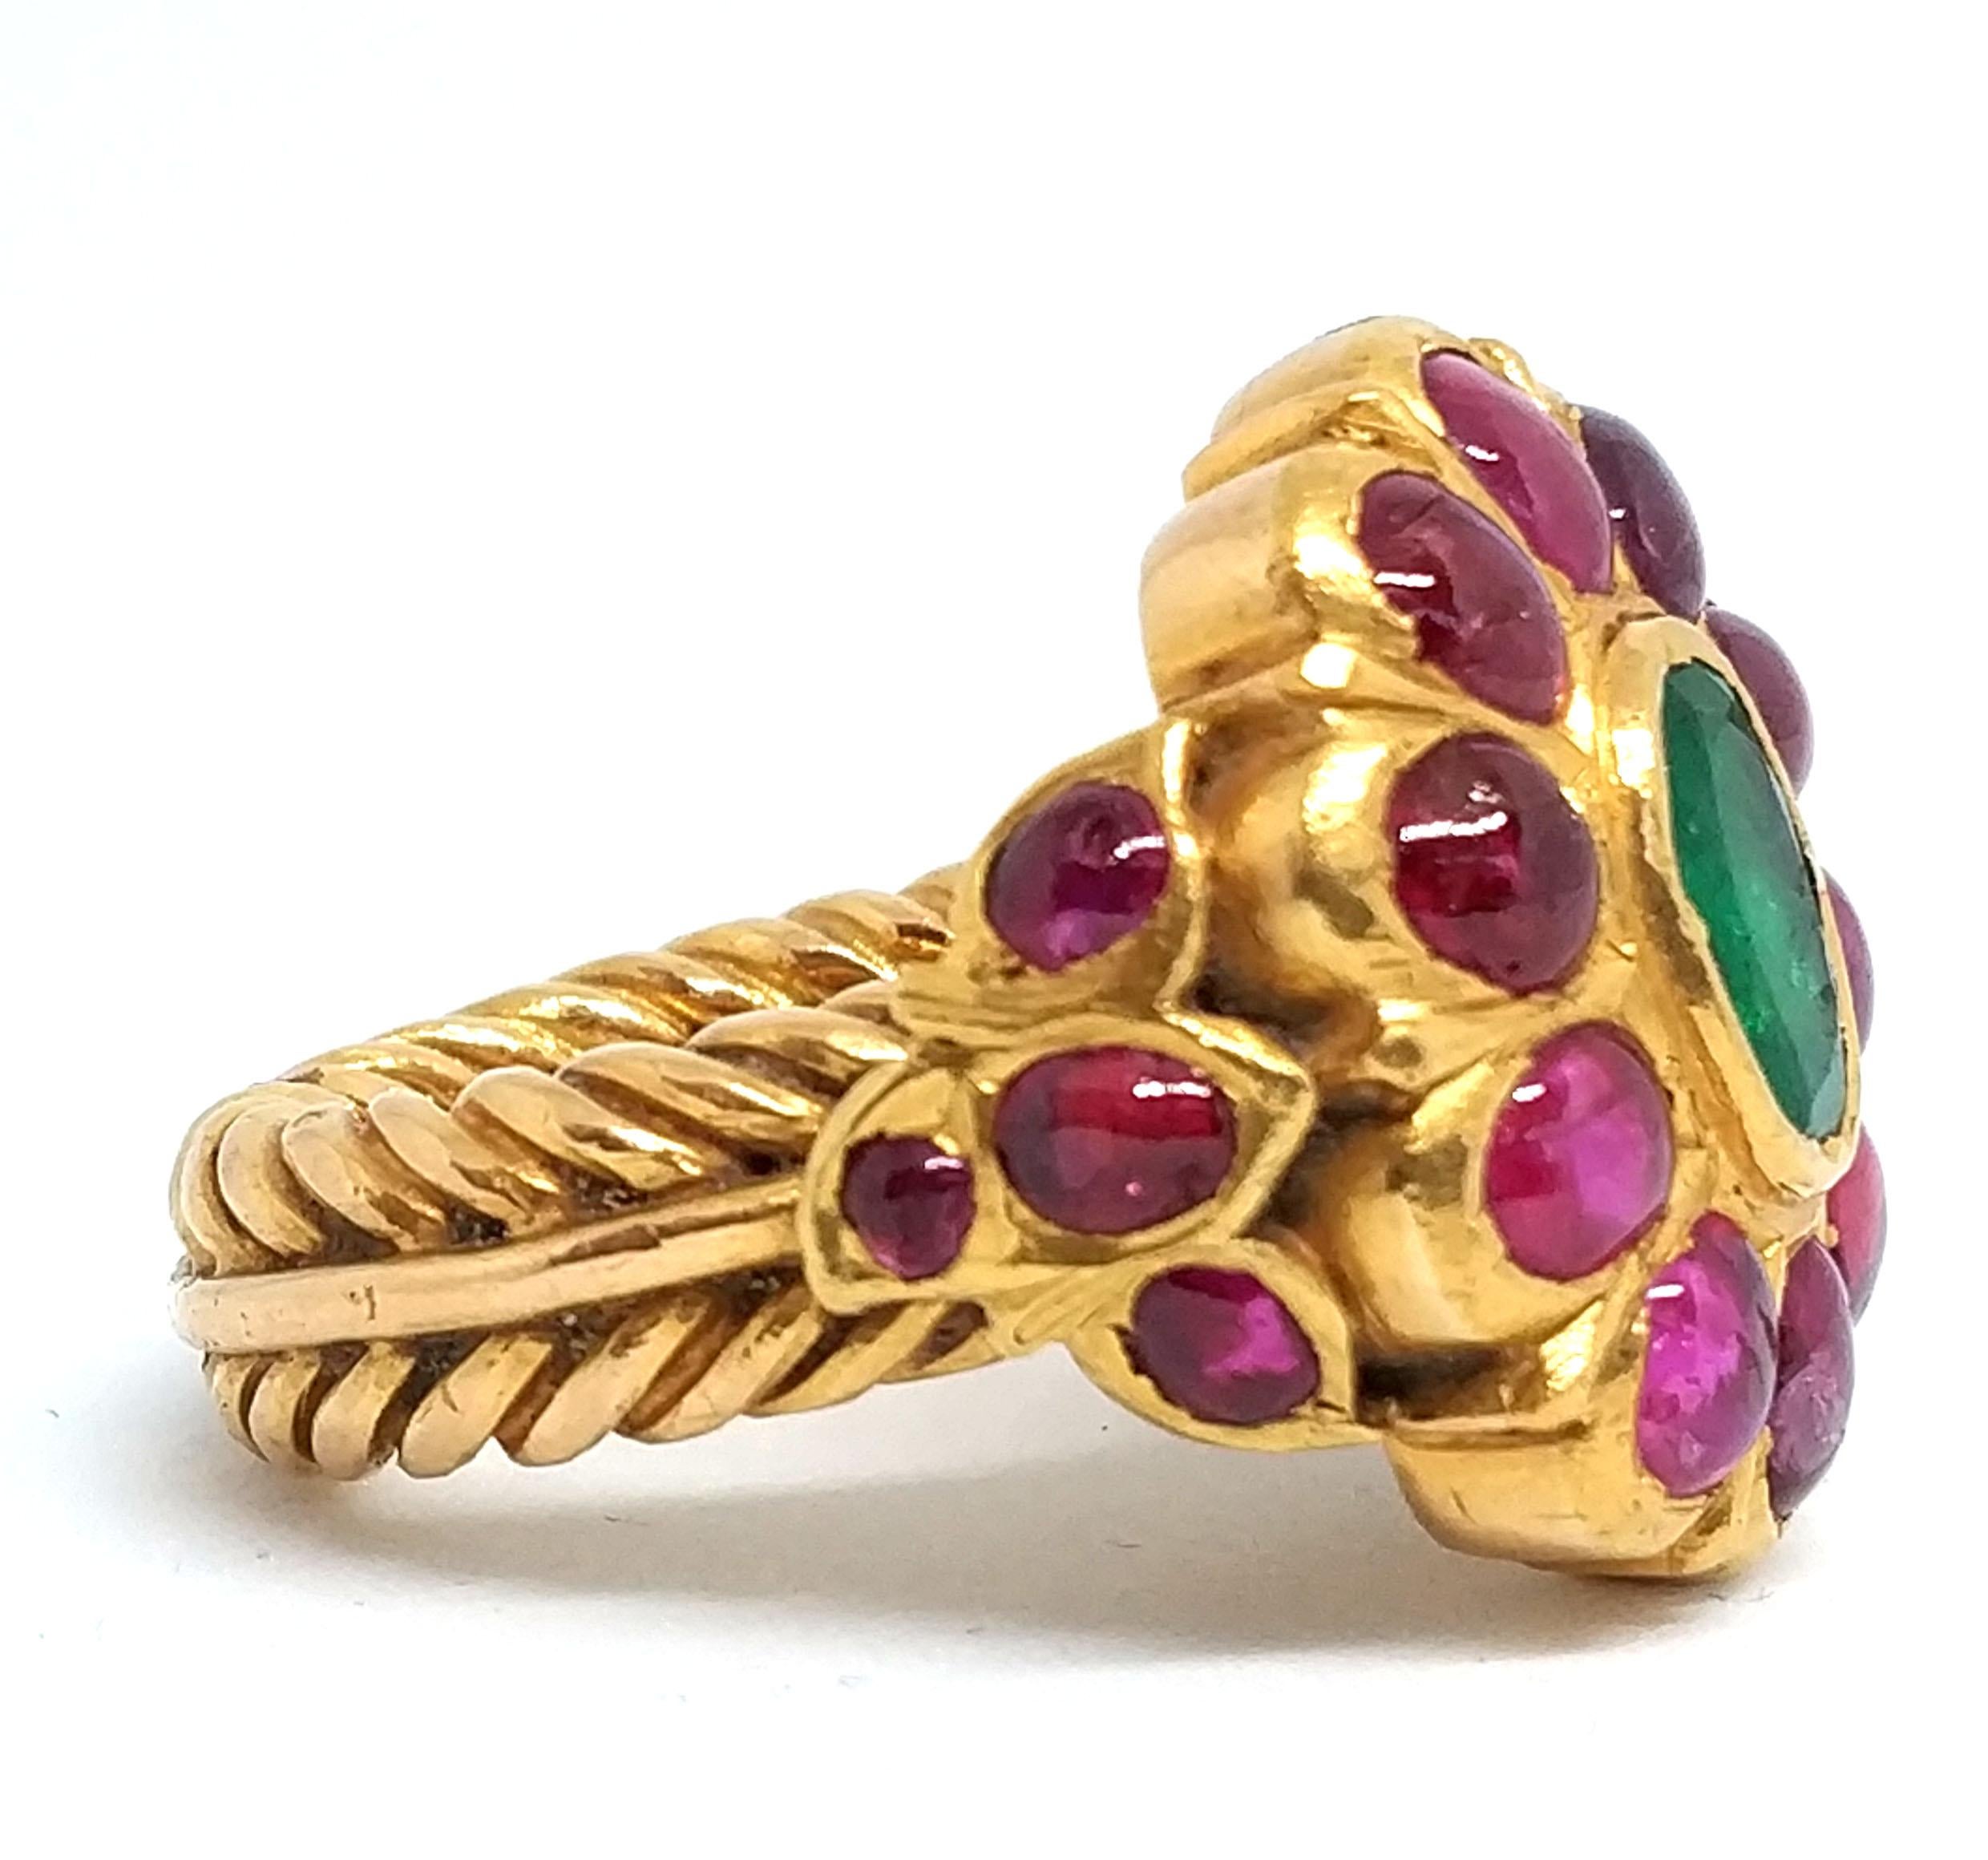 Antique Royal 5.5 carat Ruby and 3 carat Emerald Ring in 23 Carat Gold For Sale 14